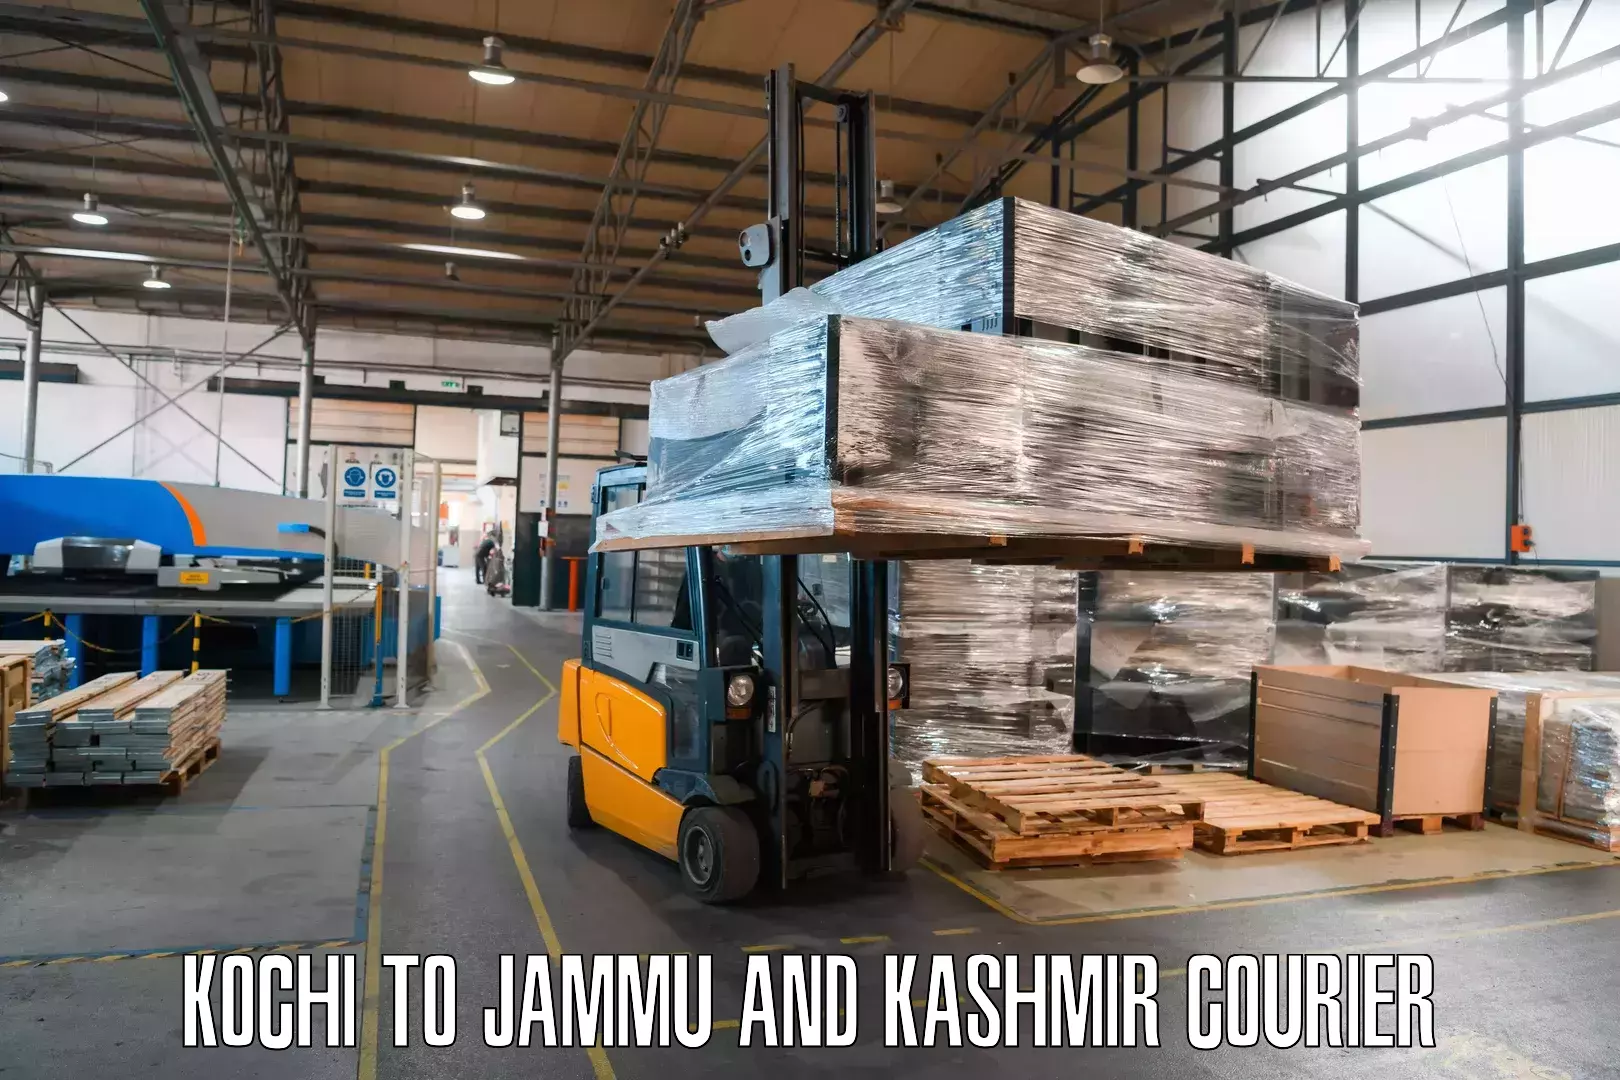 24-hour delivery options Kochi to Jammu and Kashmir